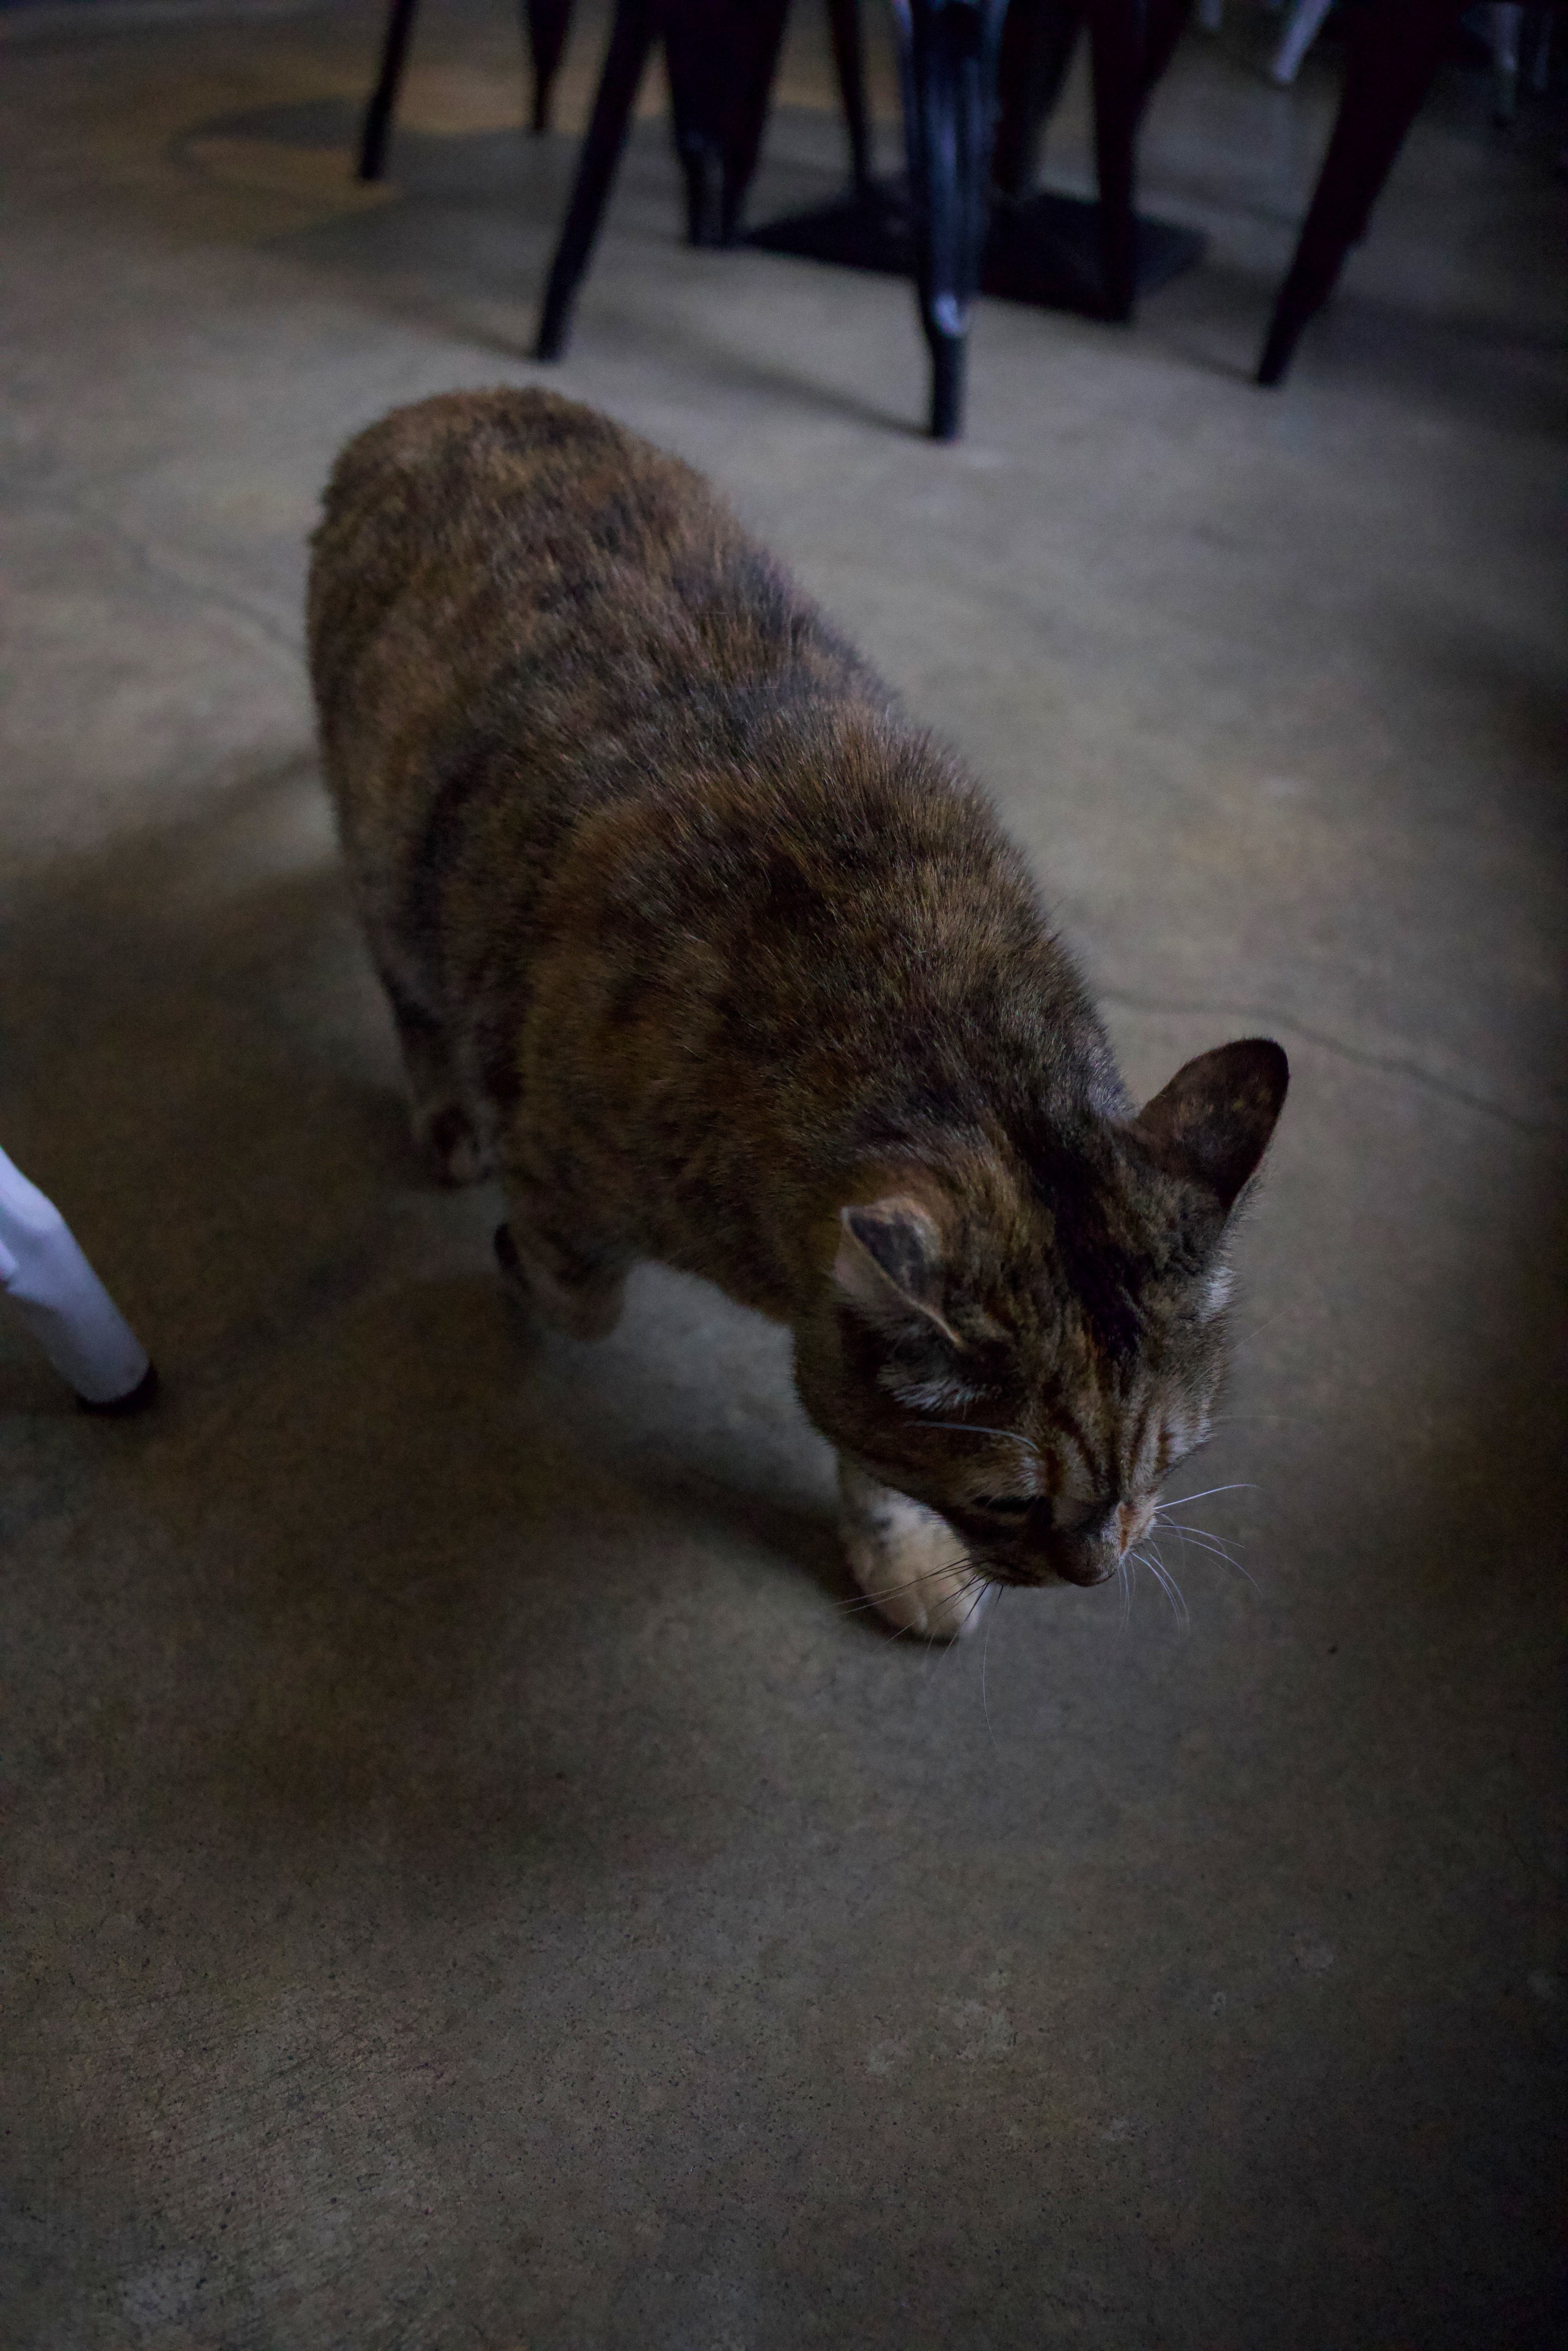 low-exposure photograph of a cat walking along the ground